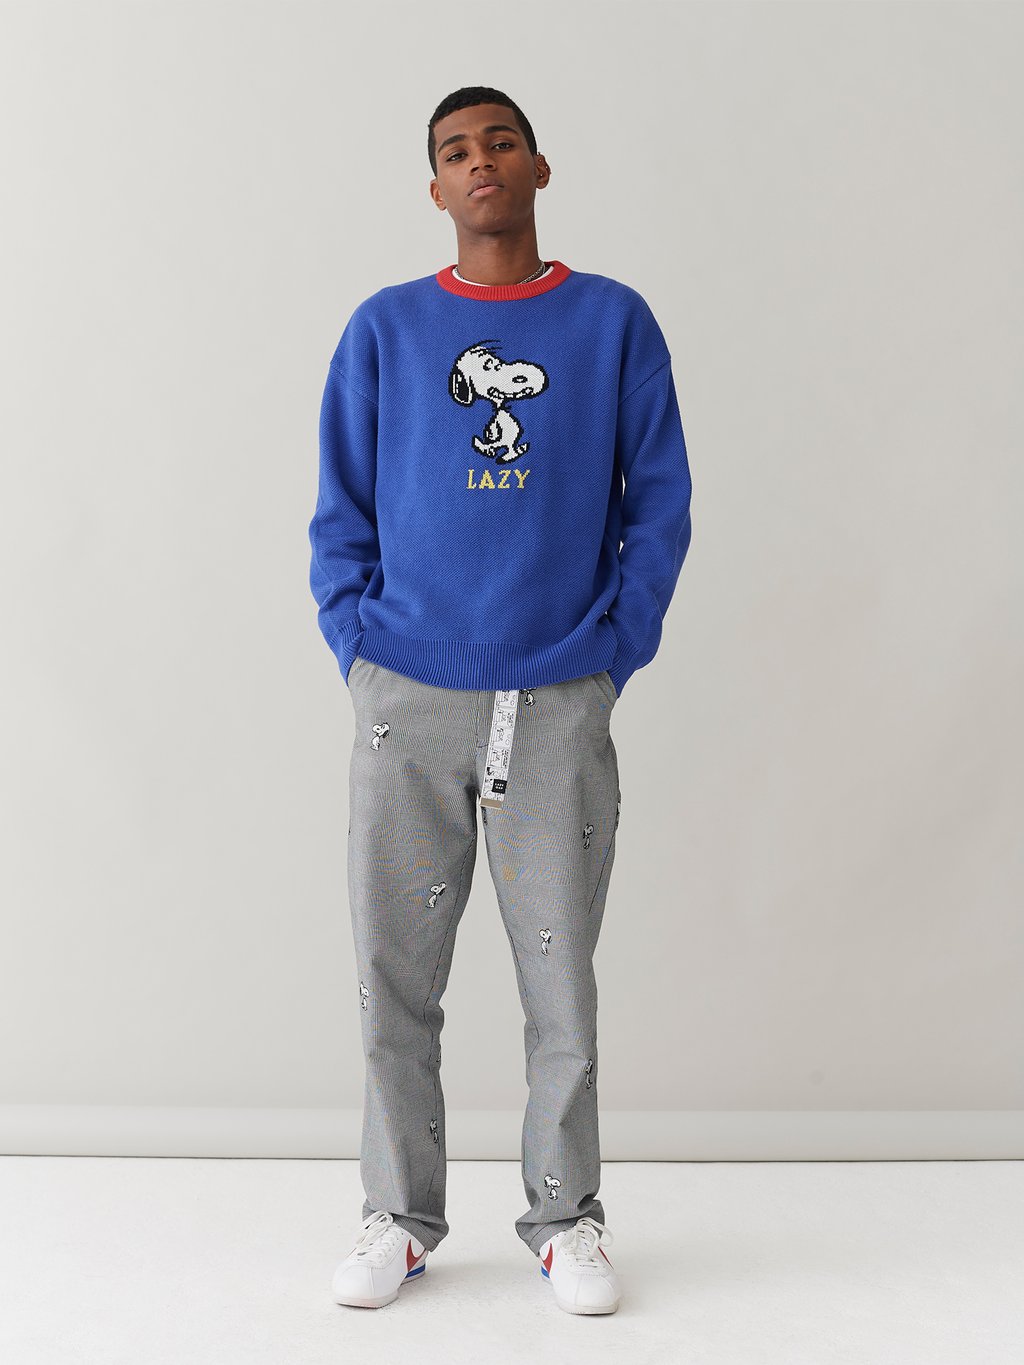 Harmonie Regeren getuige Lazy Oaf x Peanuts collection - YouLoveIt.com